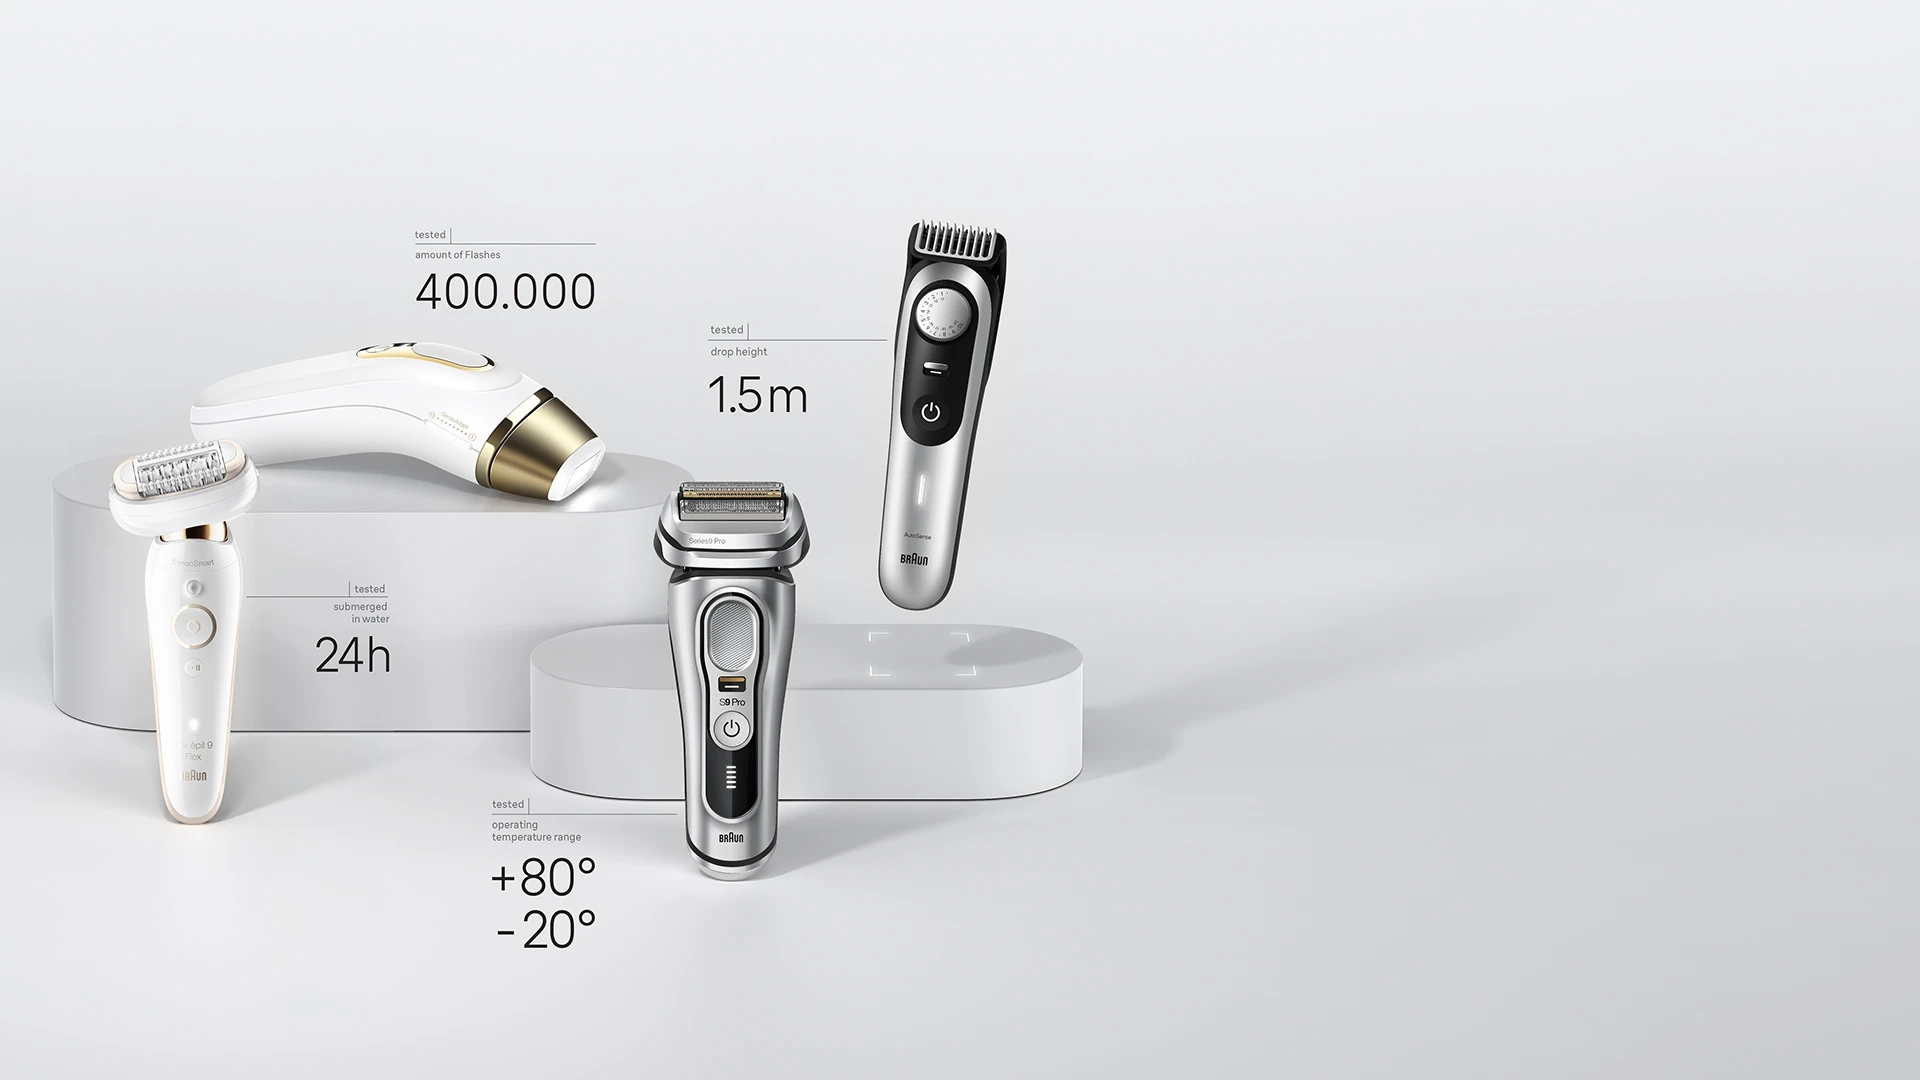 Braun's durable and long lasting electric shavers